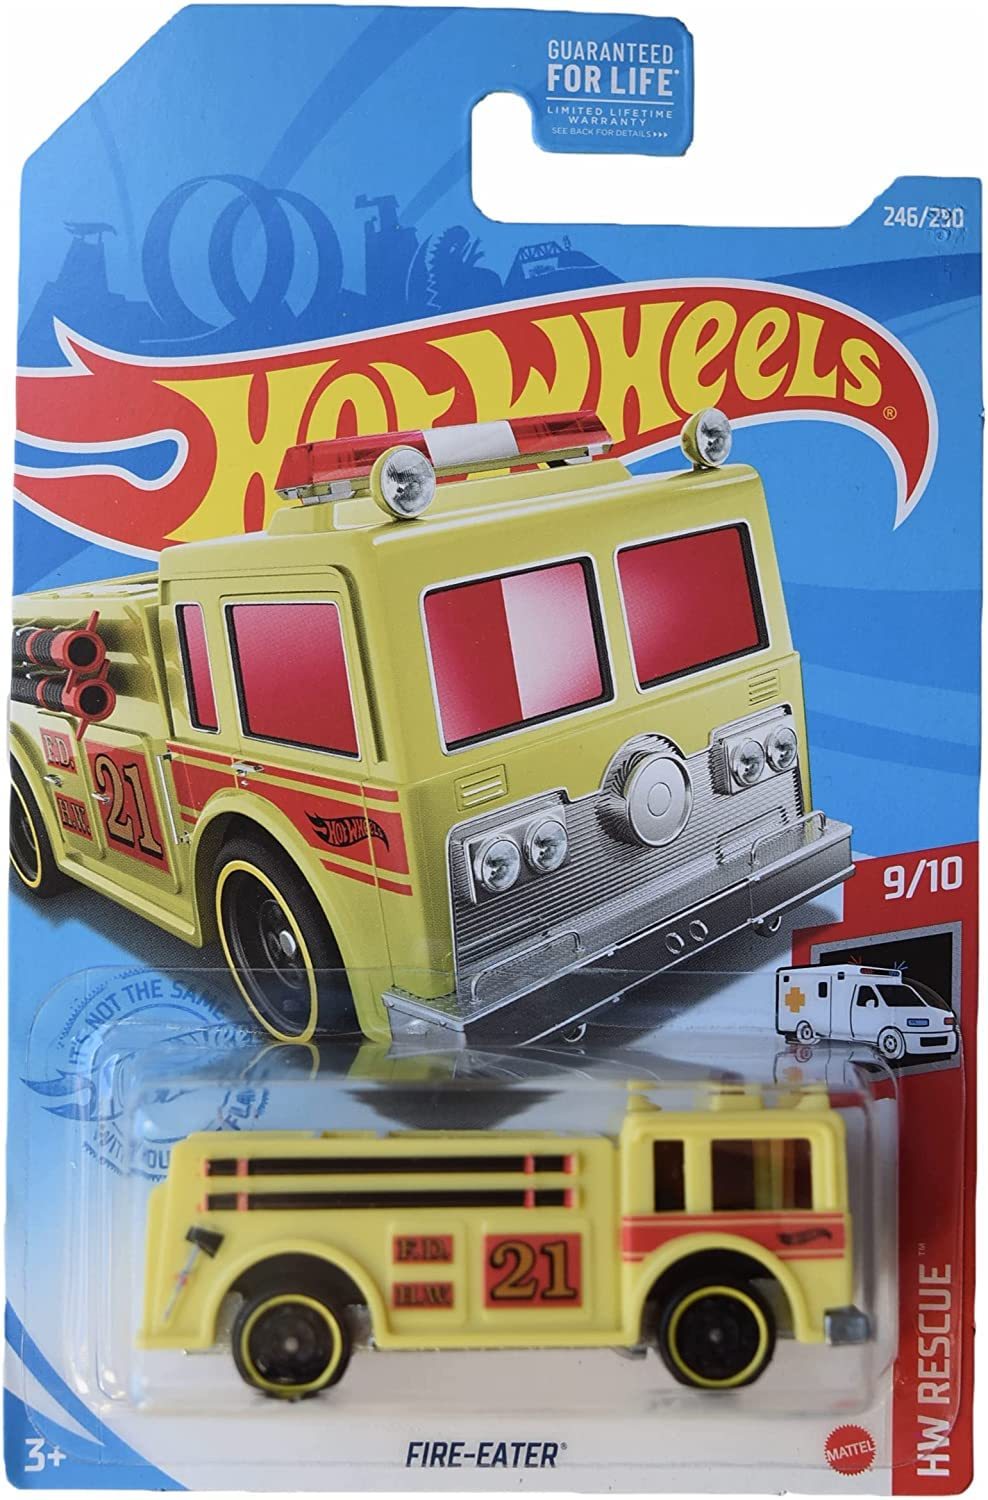 Primary image for Hot Wheels Fire-Eater, [Yellow] 246/250 Rescue 9/10